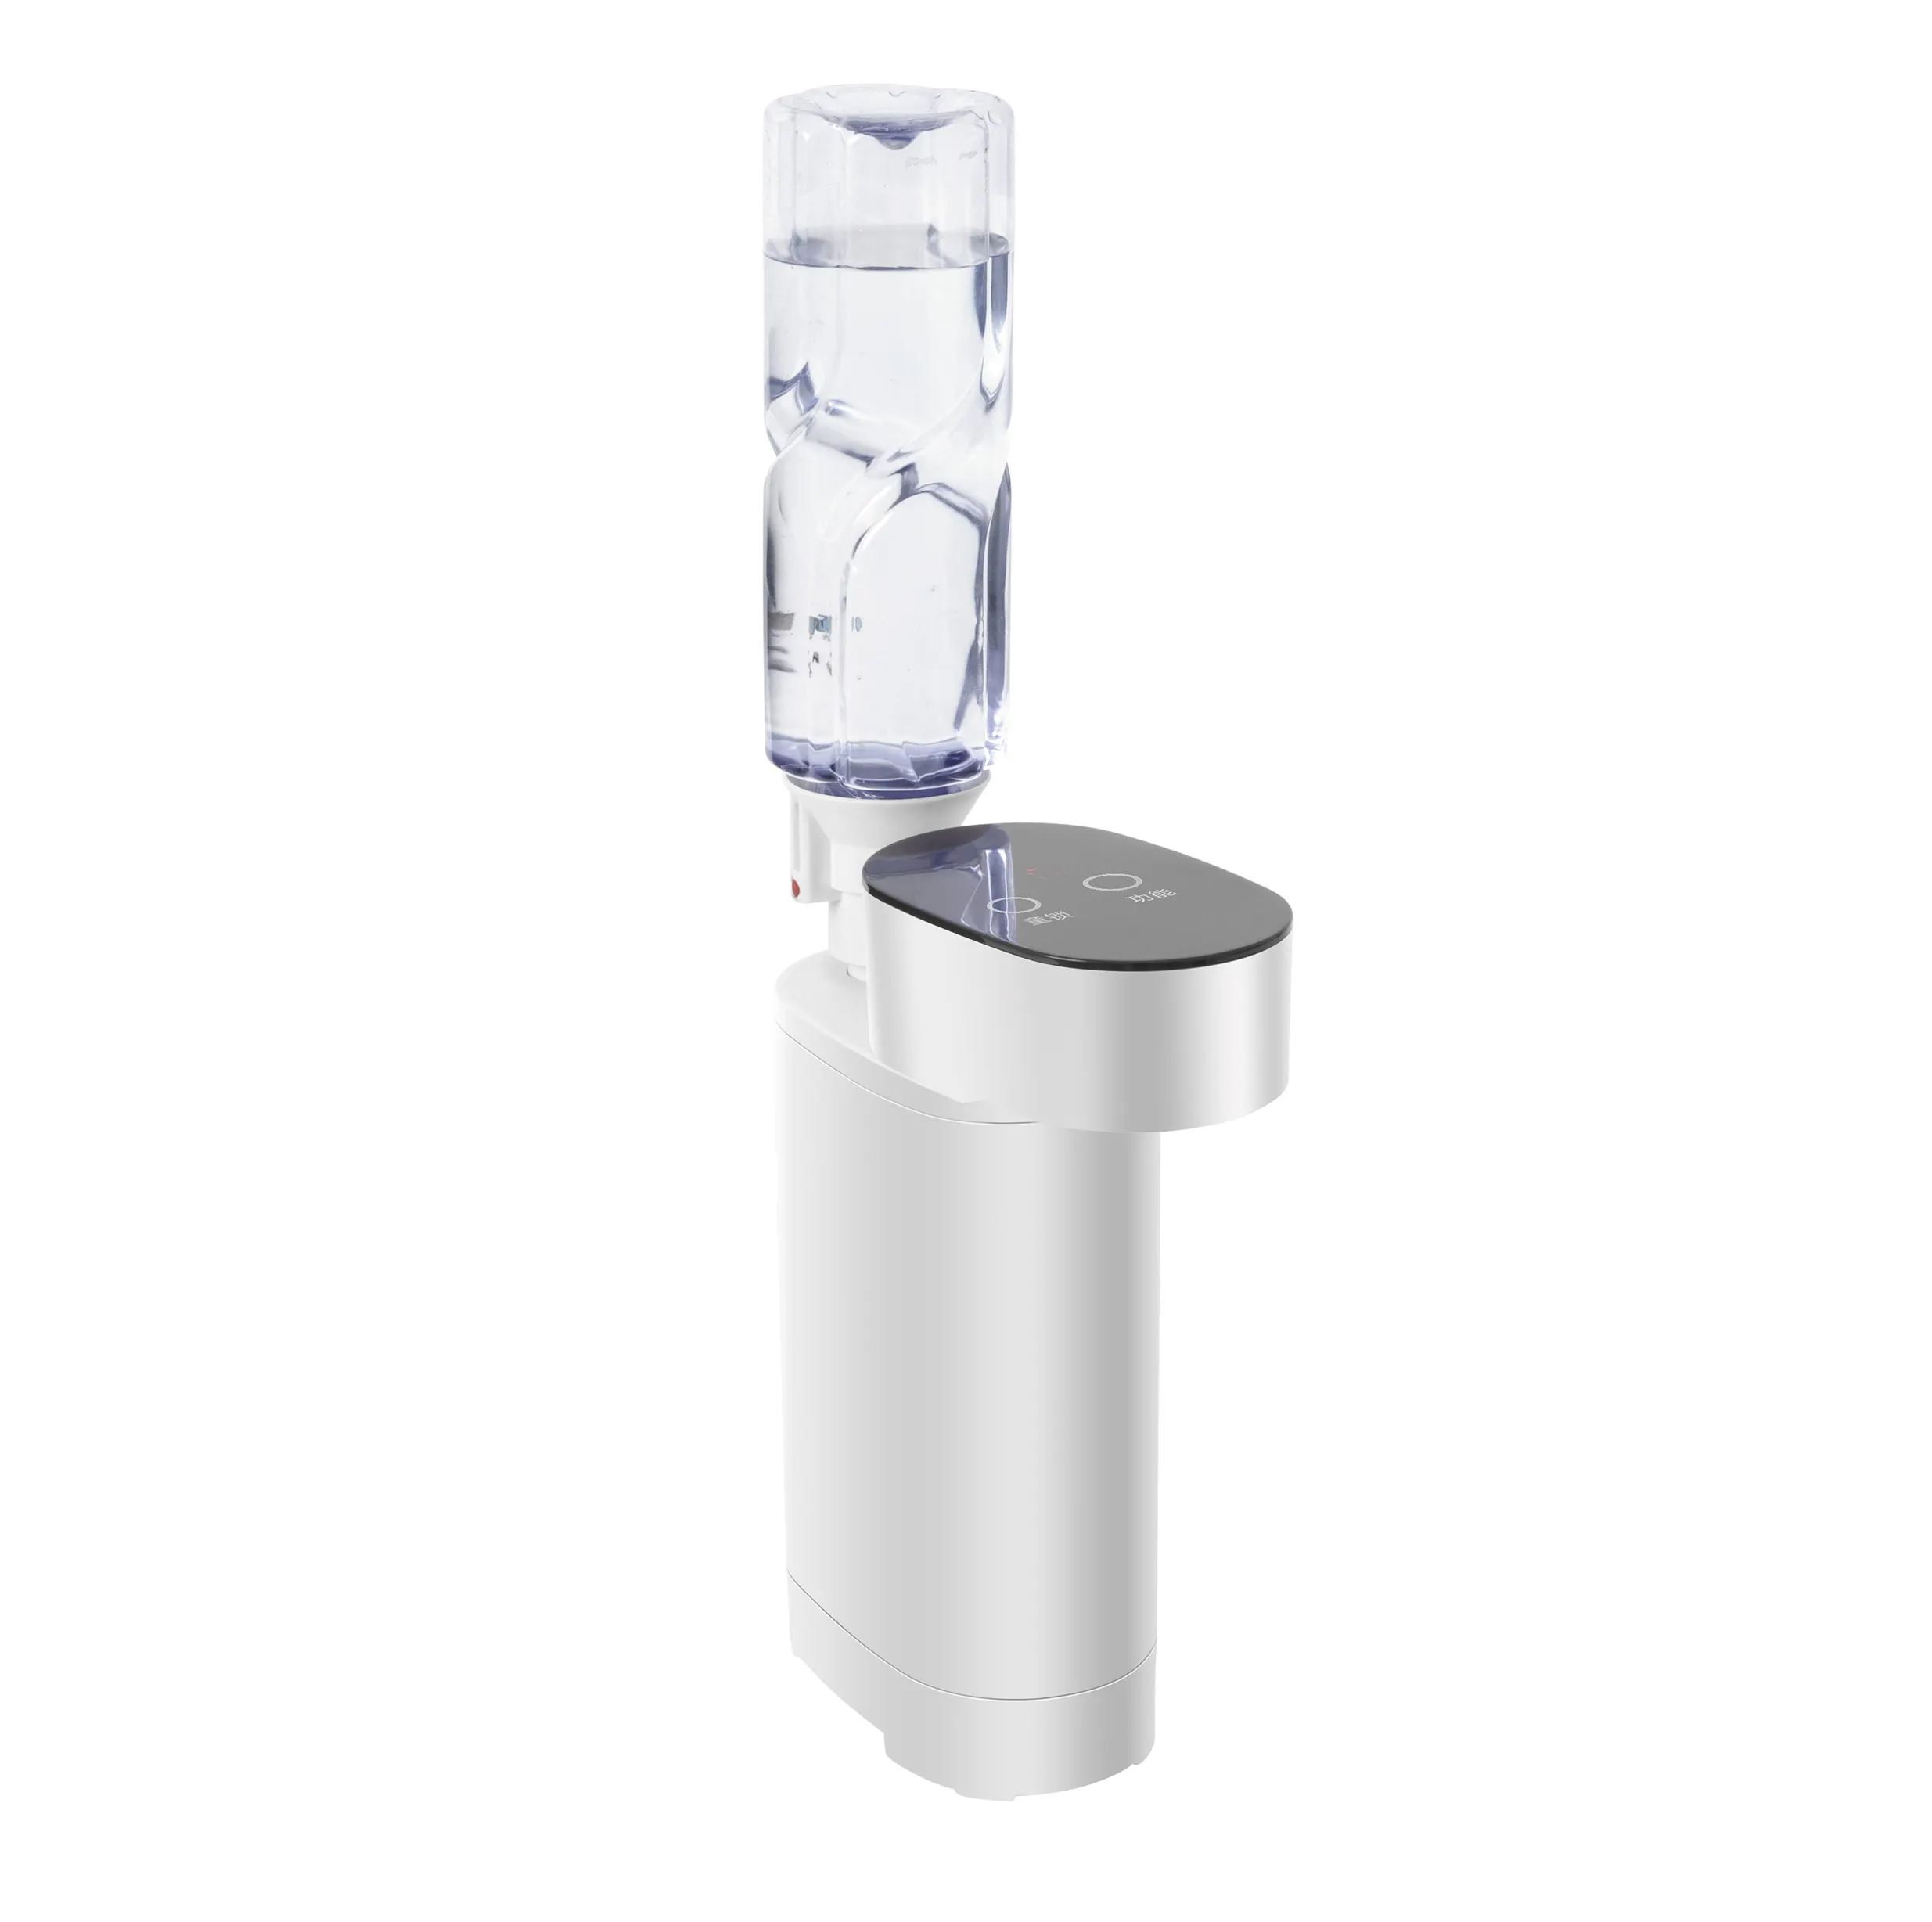 Foldable Portable Mini Automatic Fast Heating Desktop Portable Water Dispenser Pump Hot Cold Water Freestanding Water Dispensers